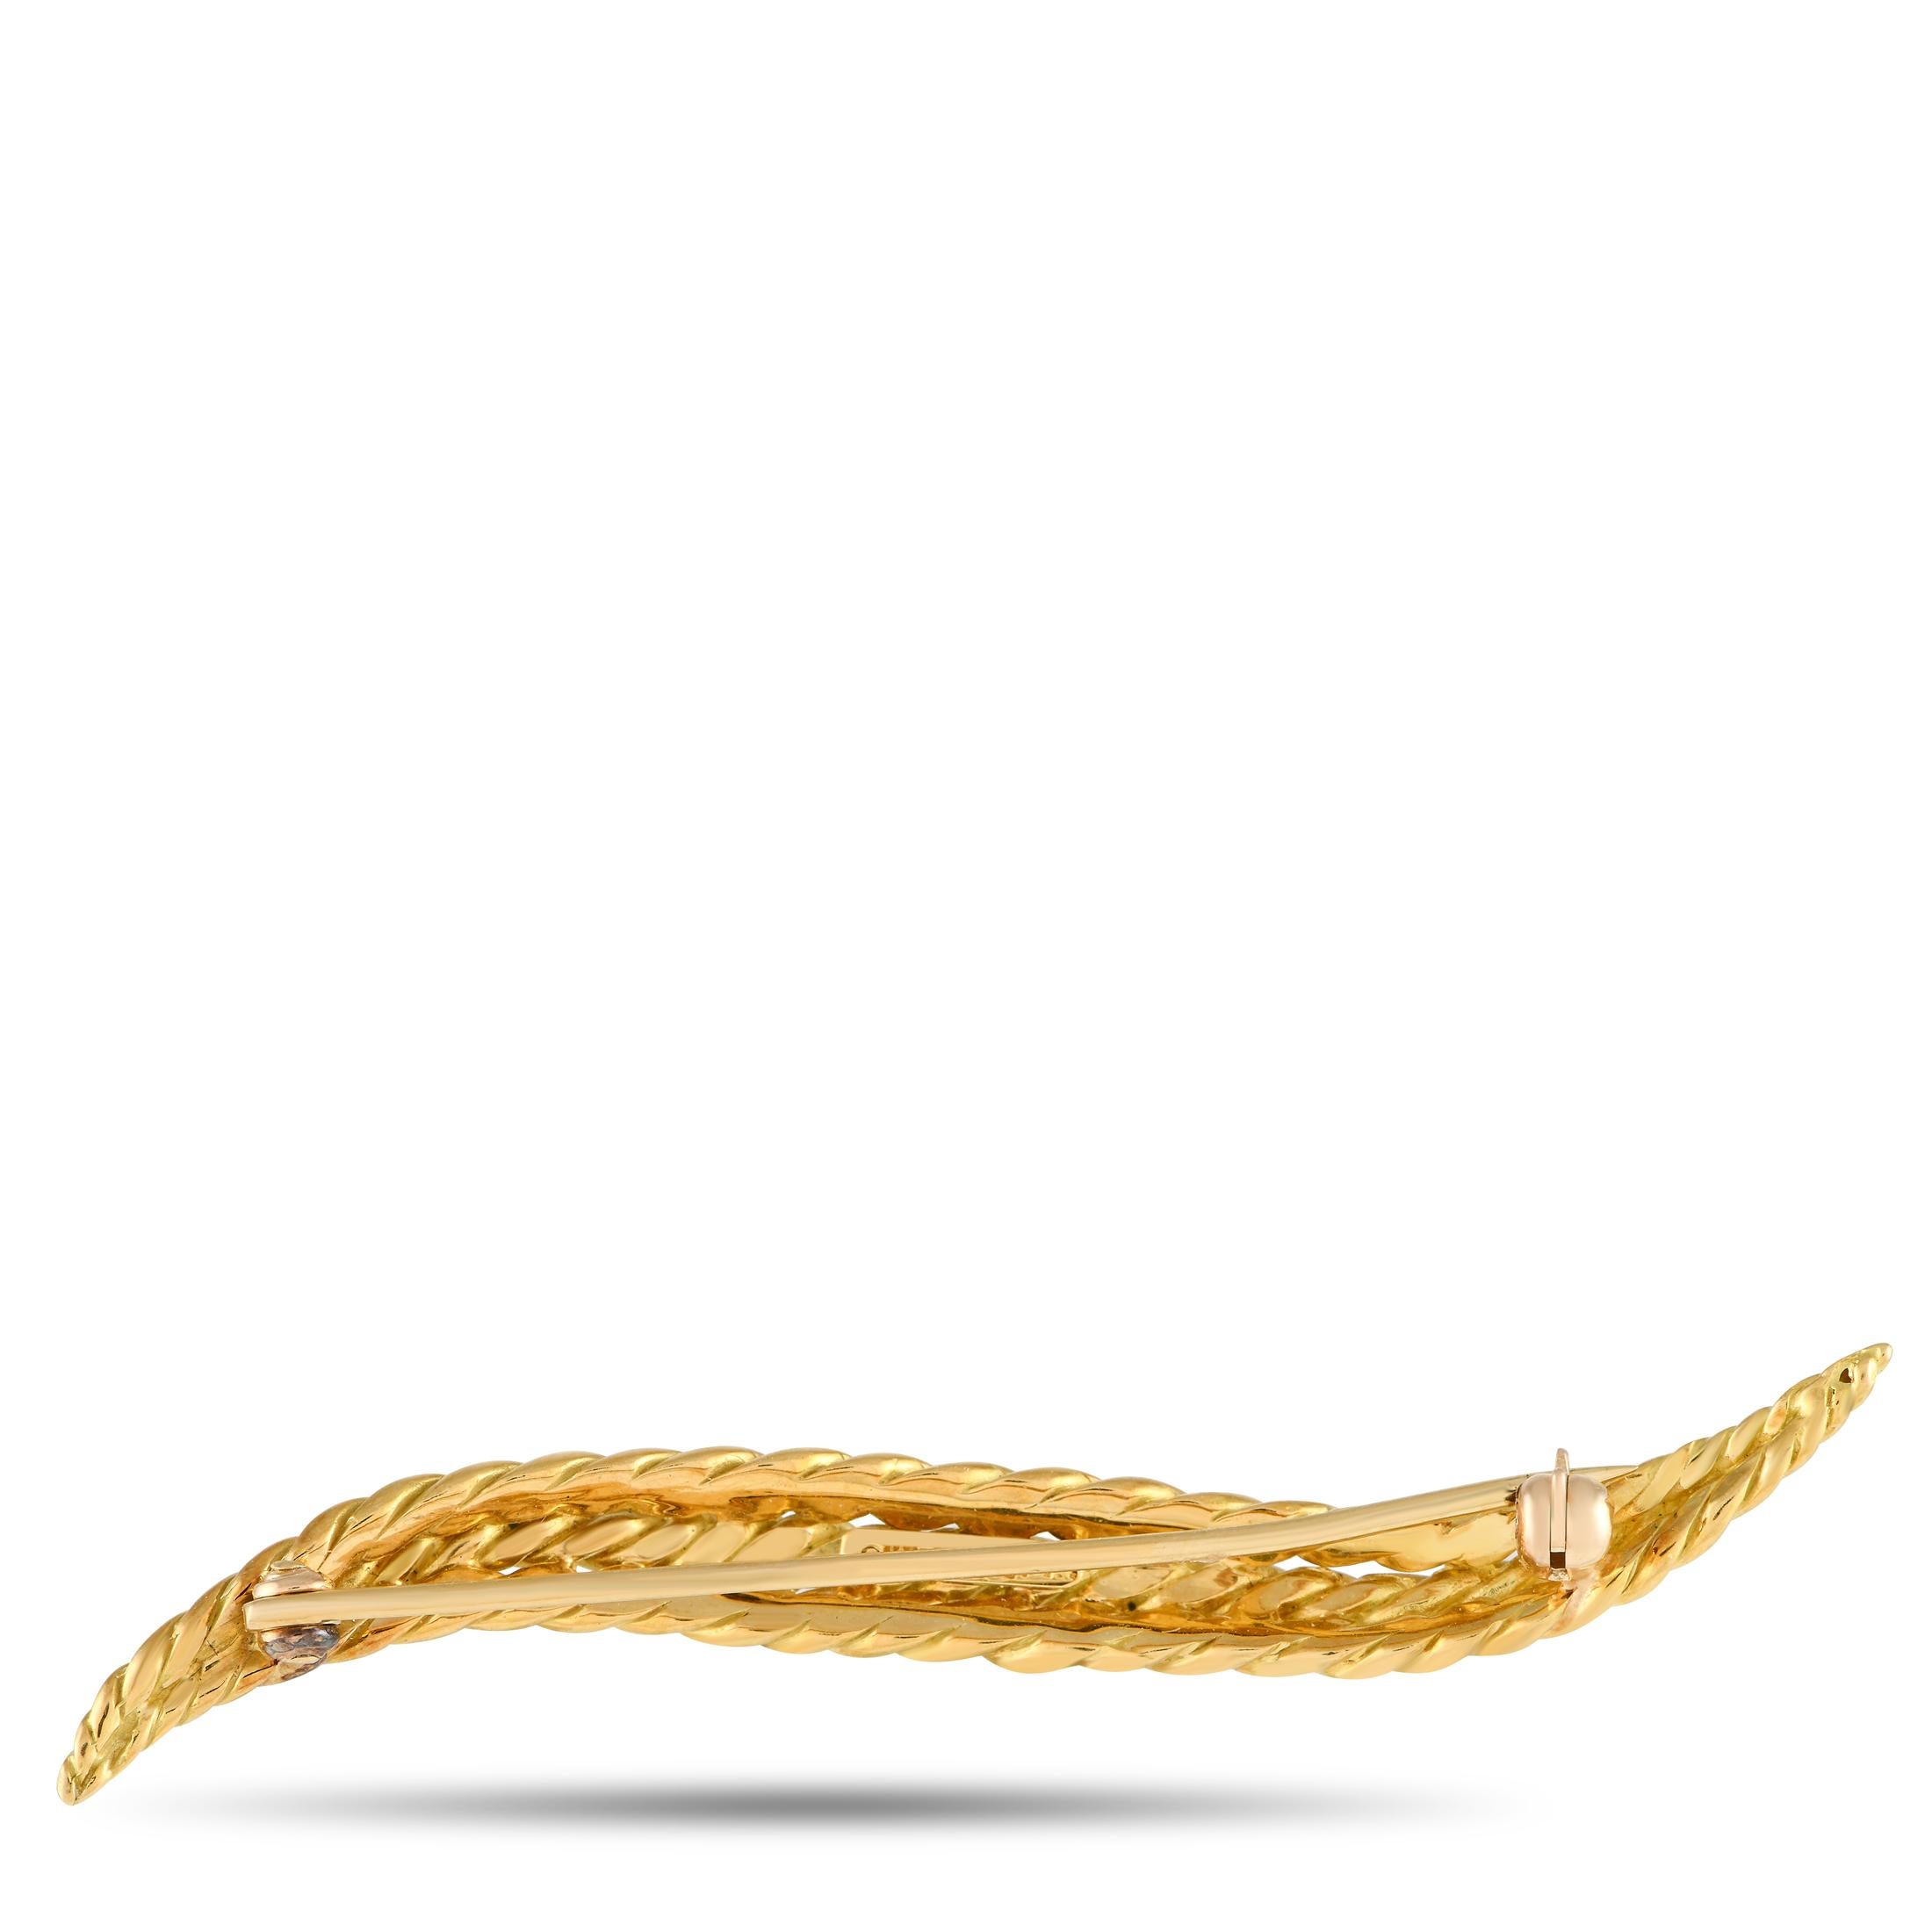 This sleek, stylish David Webb brooch is a minimalist piece with plenty of visual impact. Textured 18K Yellow Gold adds texture to this piece, which measures 2.5 long by 0.25 wide.This jewelry piece is offered in estate condition and includes a gift